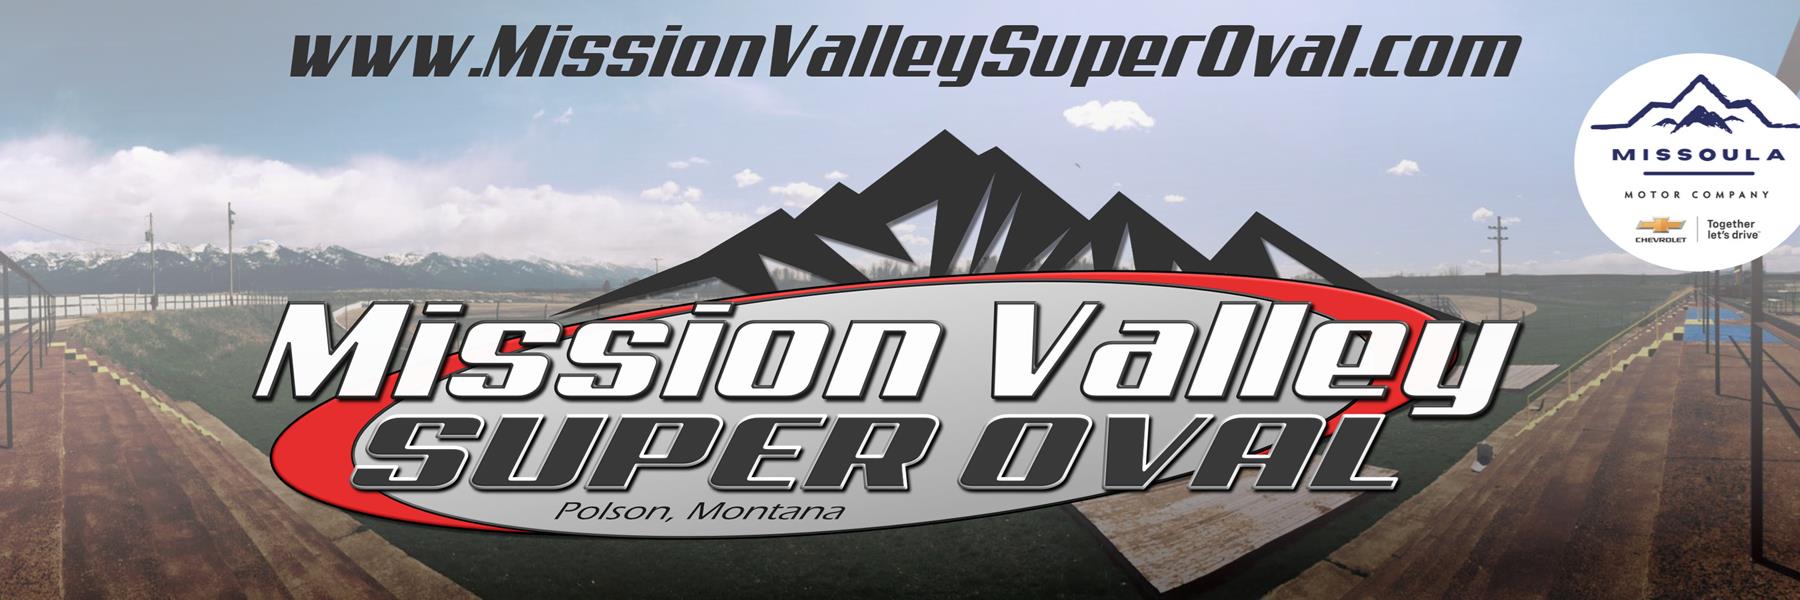 5/22/2021 - Mission Valley Super Oval